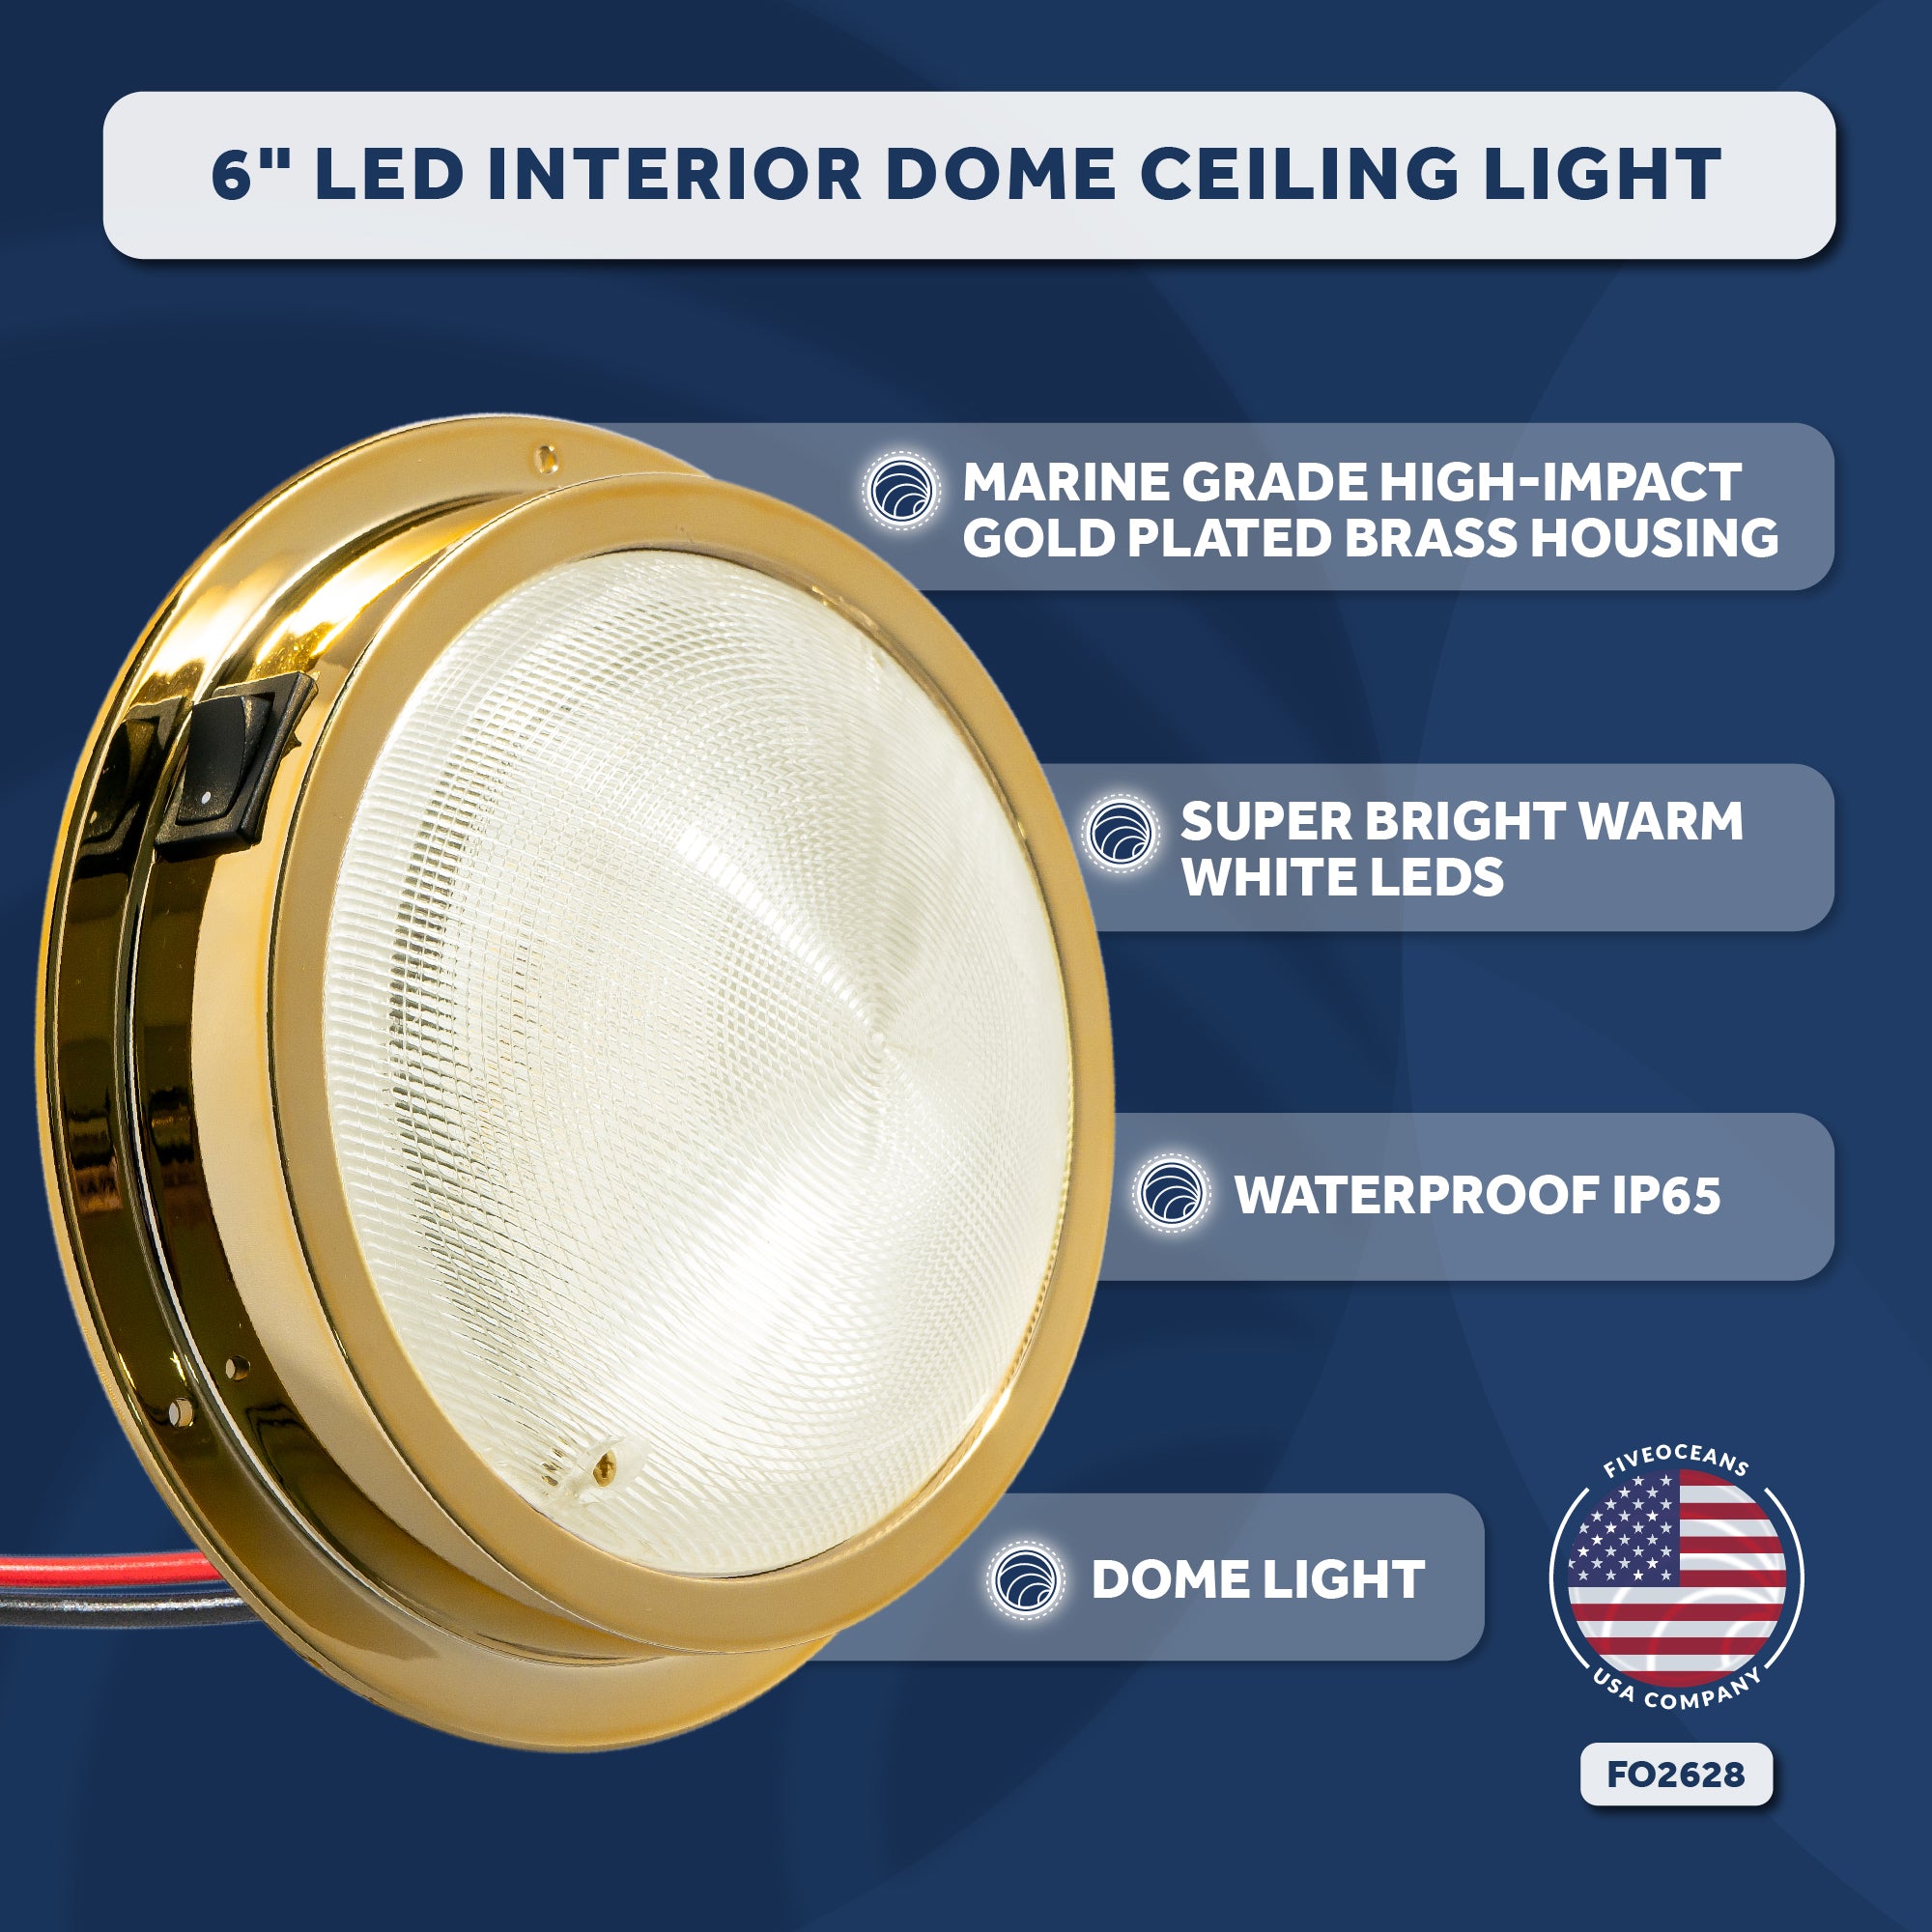 LED Interior Dome Ceiling Light, 6" Surface Mount, Warm White - FO2628